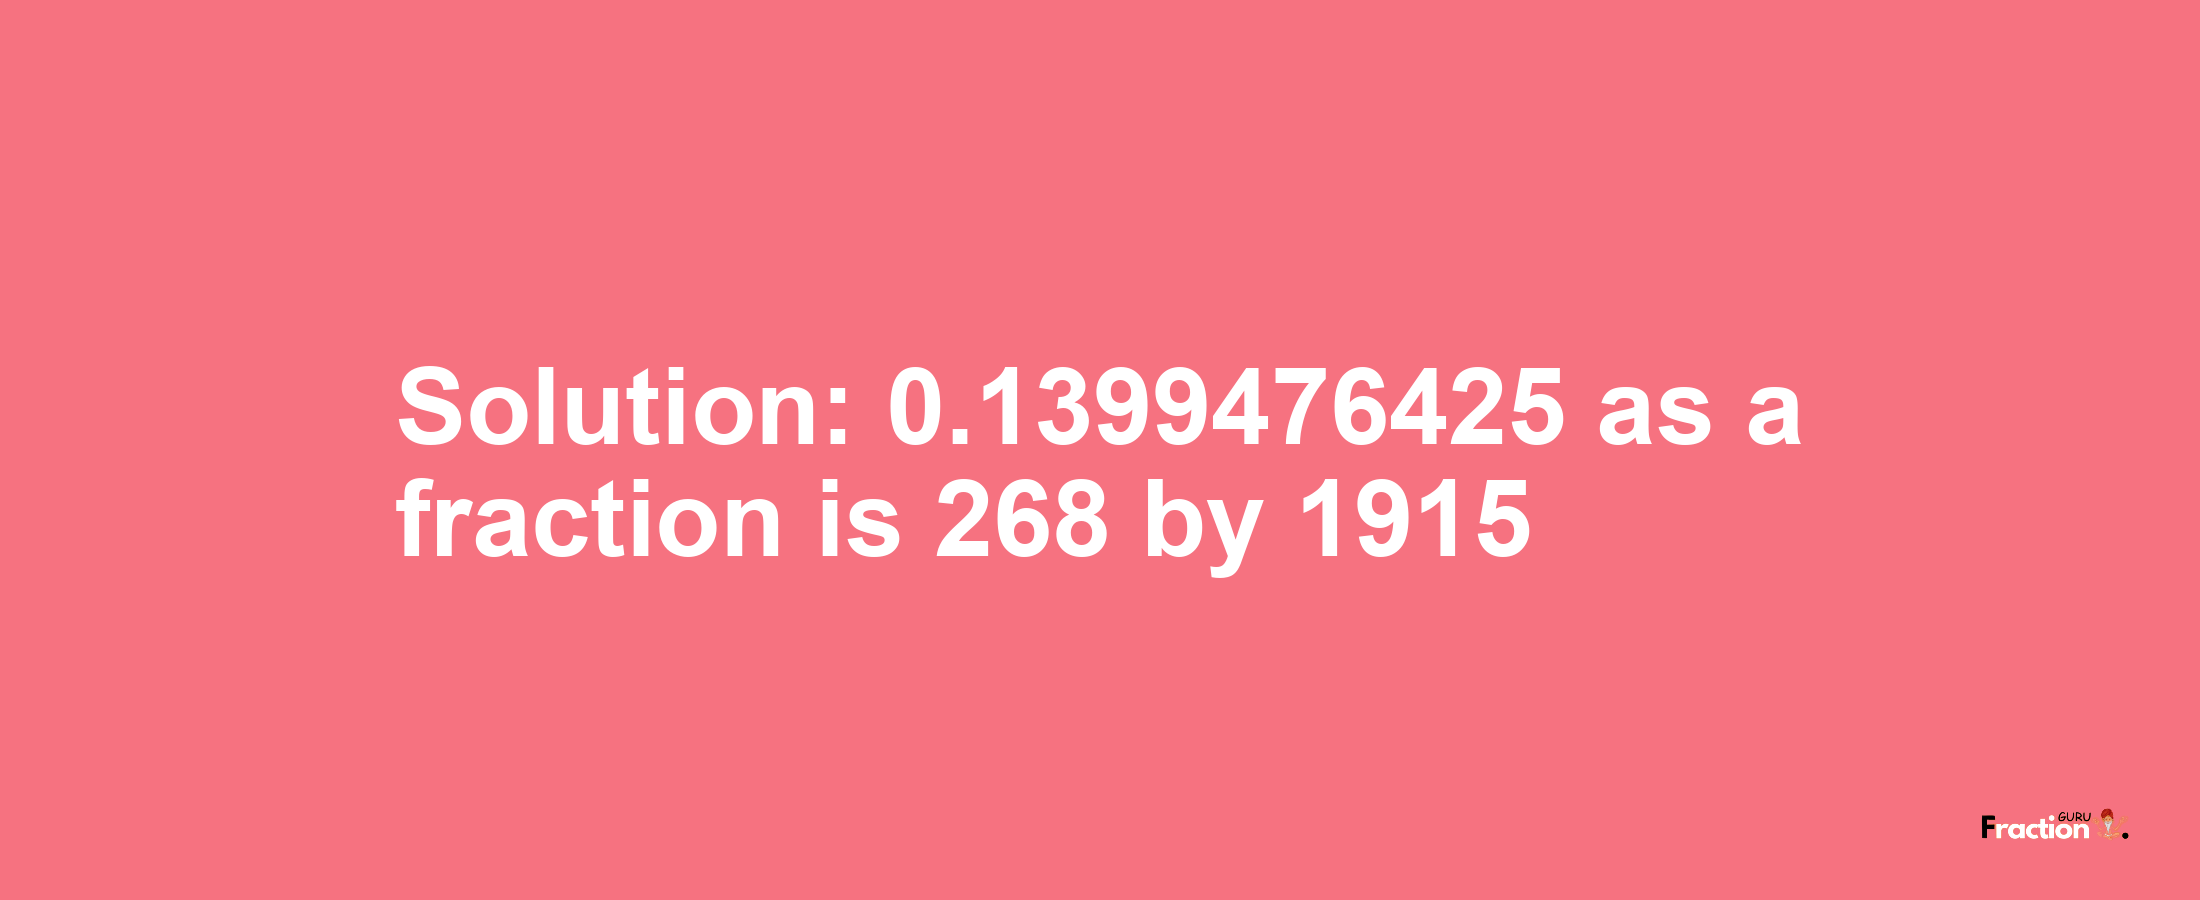 Solution:0.1399476425 as a fraction is 268/1915